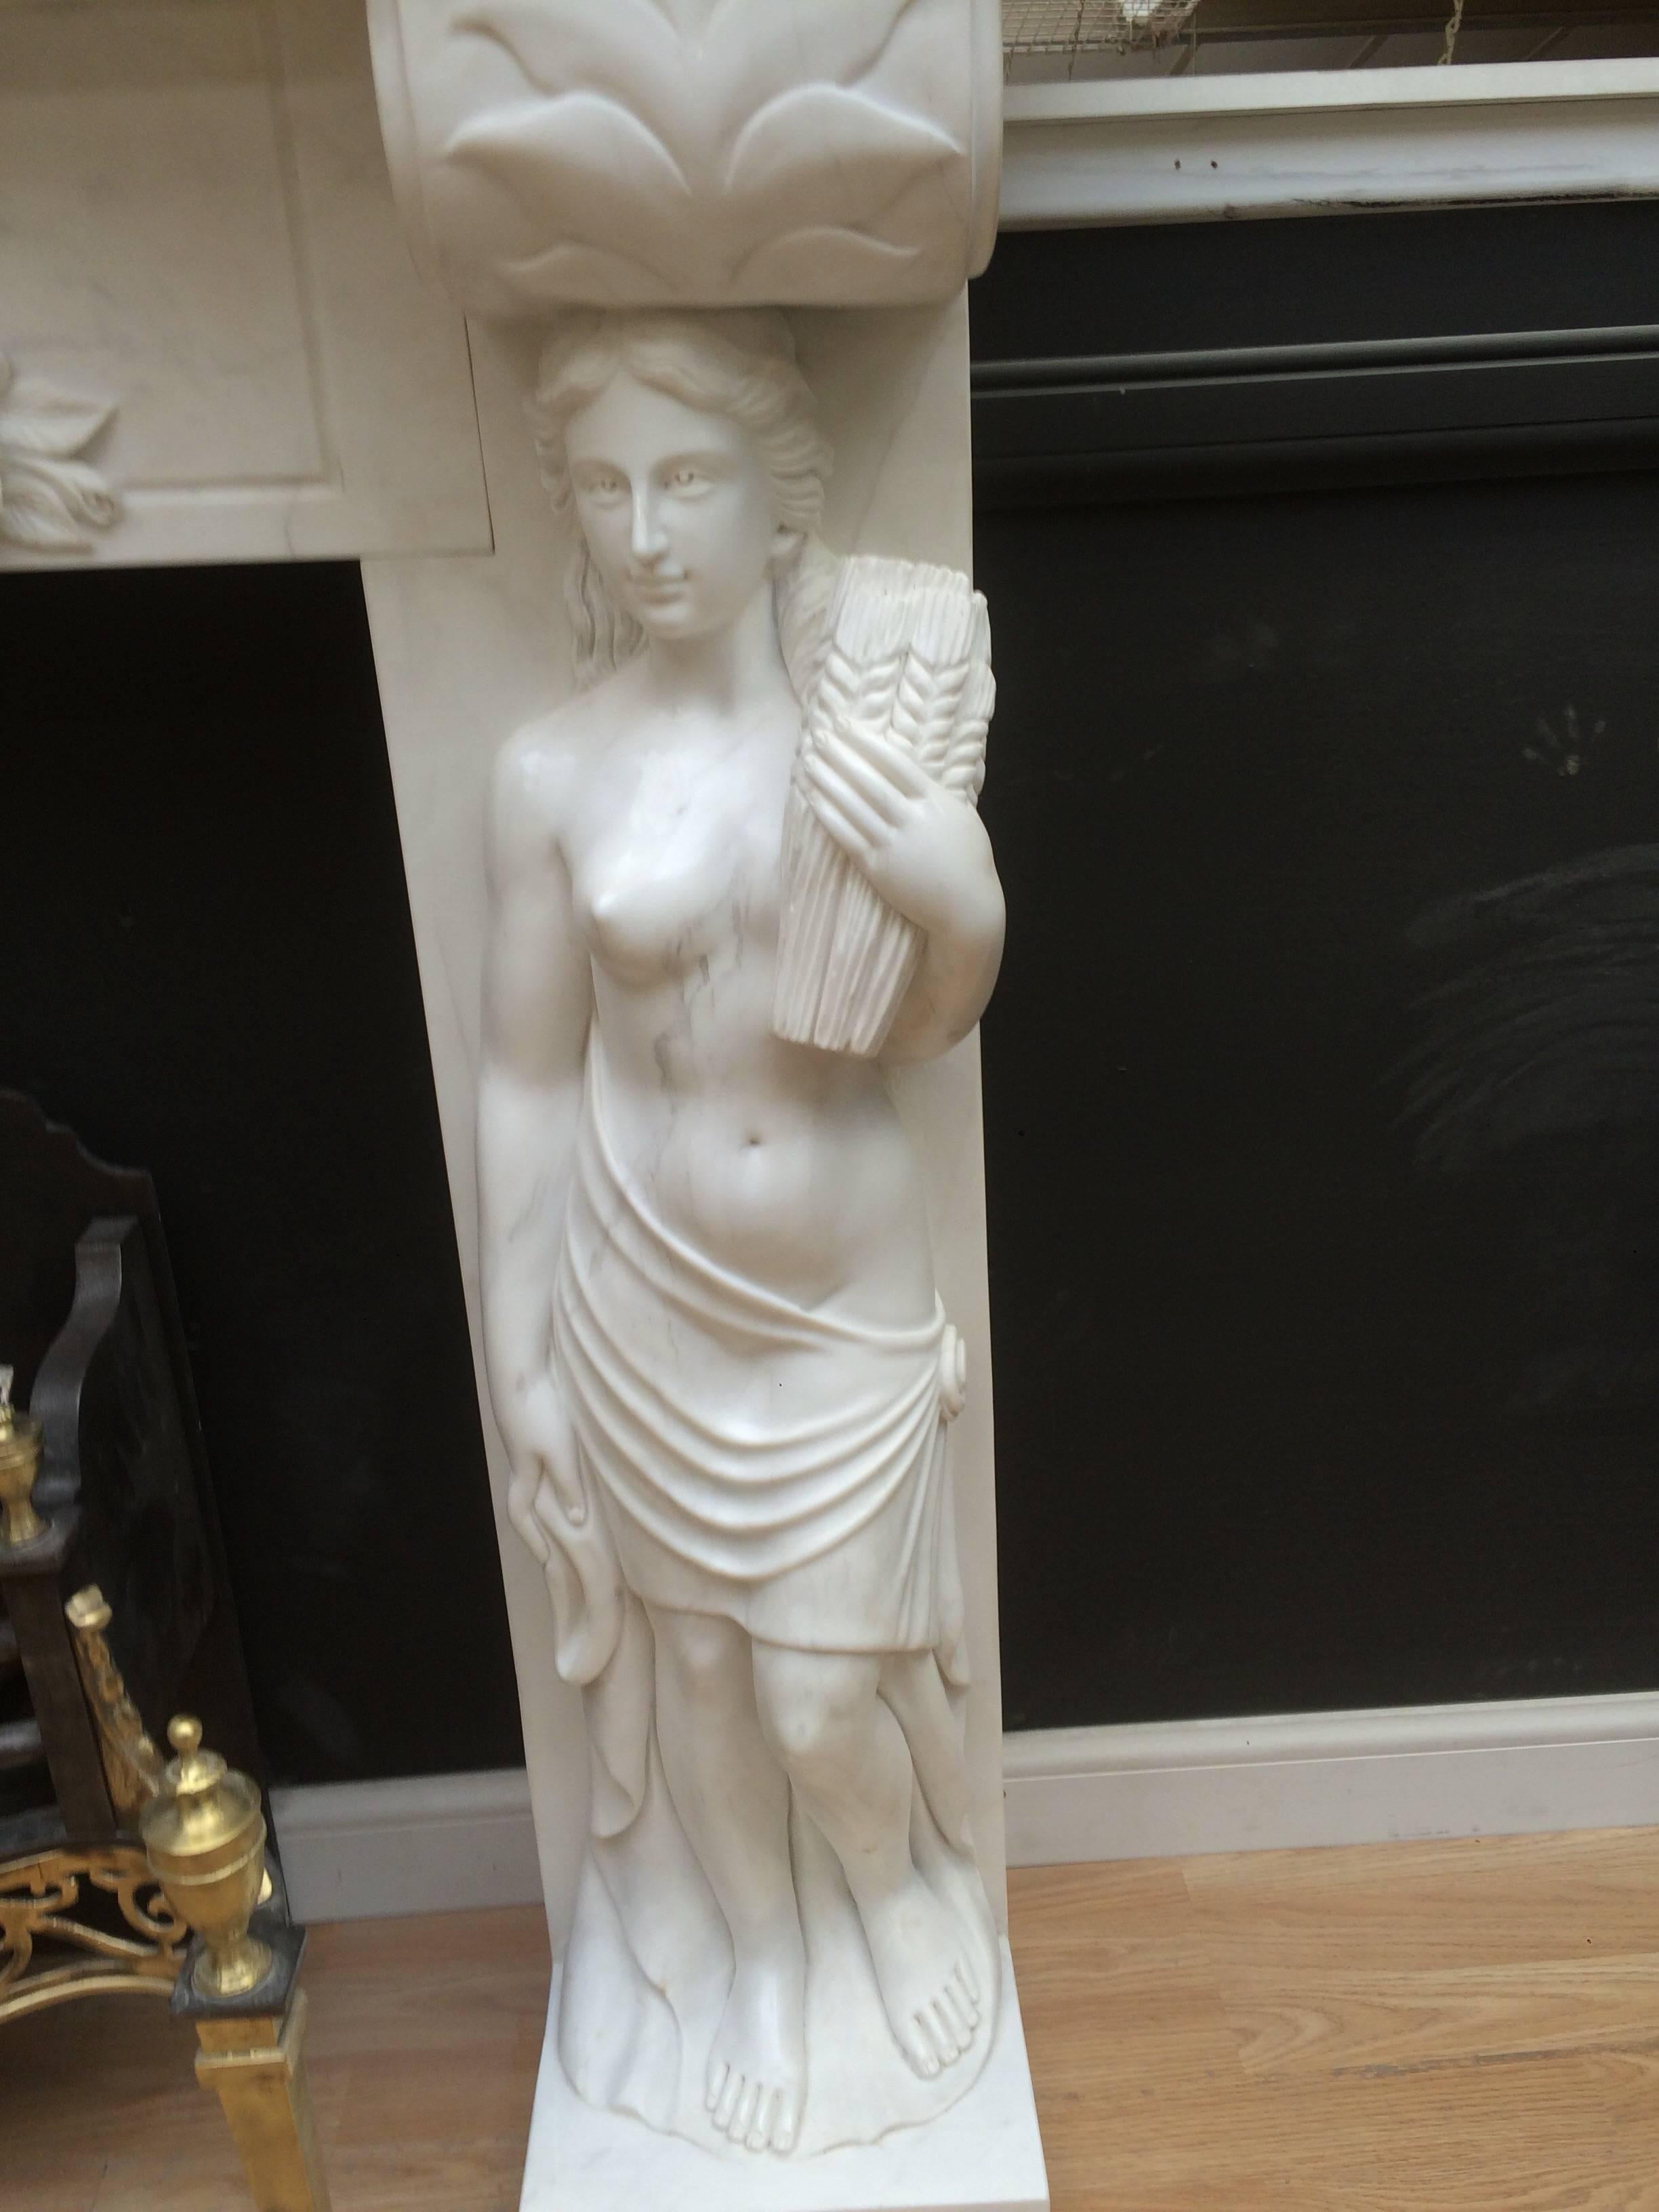 A detailed and well carved statuary marble Fireplace Surround and cast iron insert, showing good, detailed carving throughout. Comes with its cast iron insert, ready for a gas fire or you could convert to solid fuel. A reproduction piece, probably